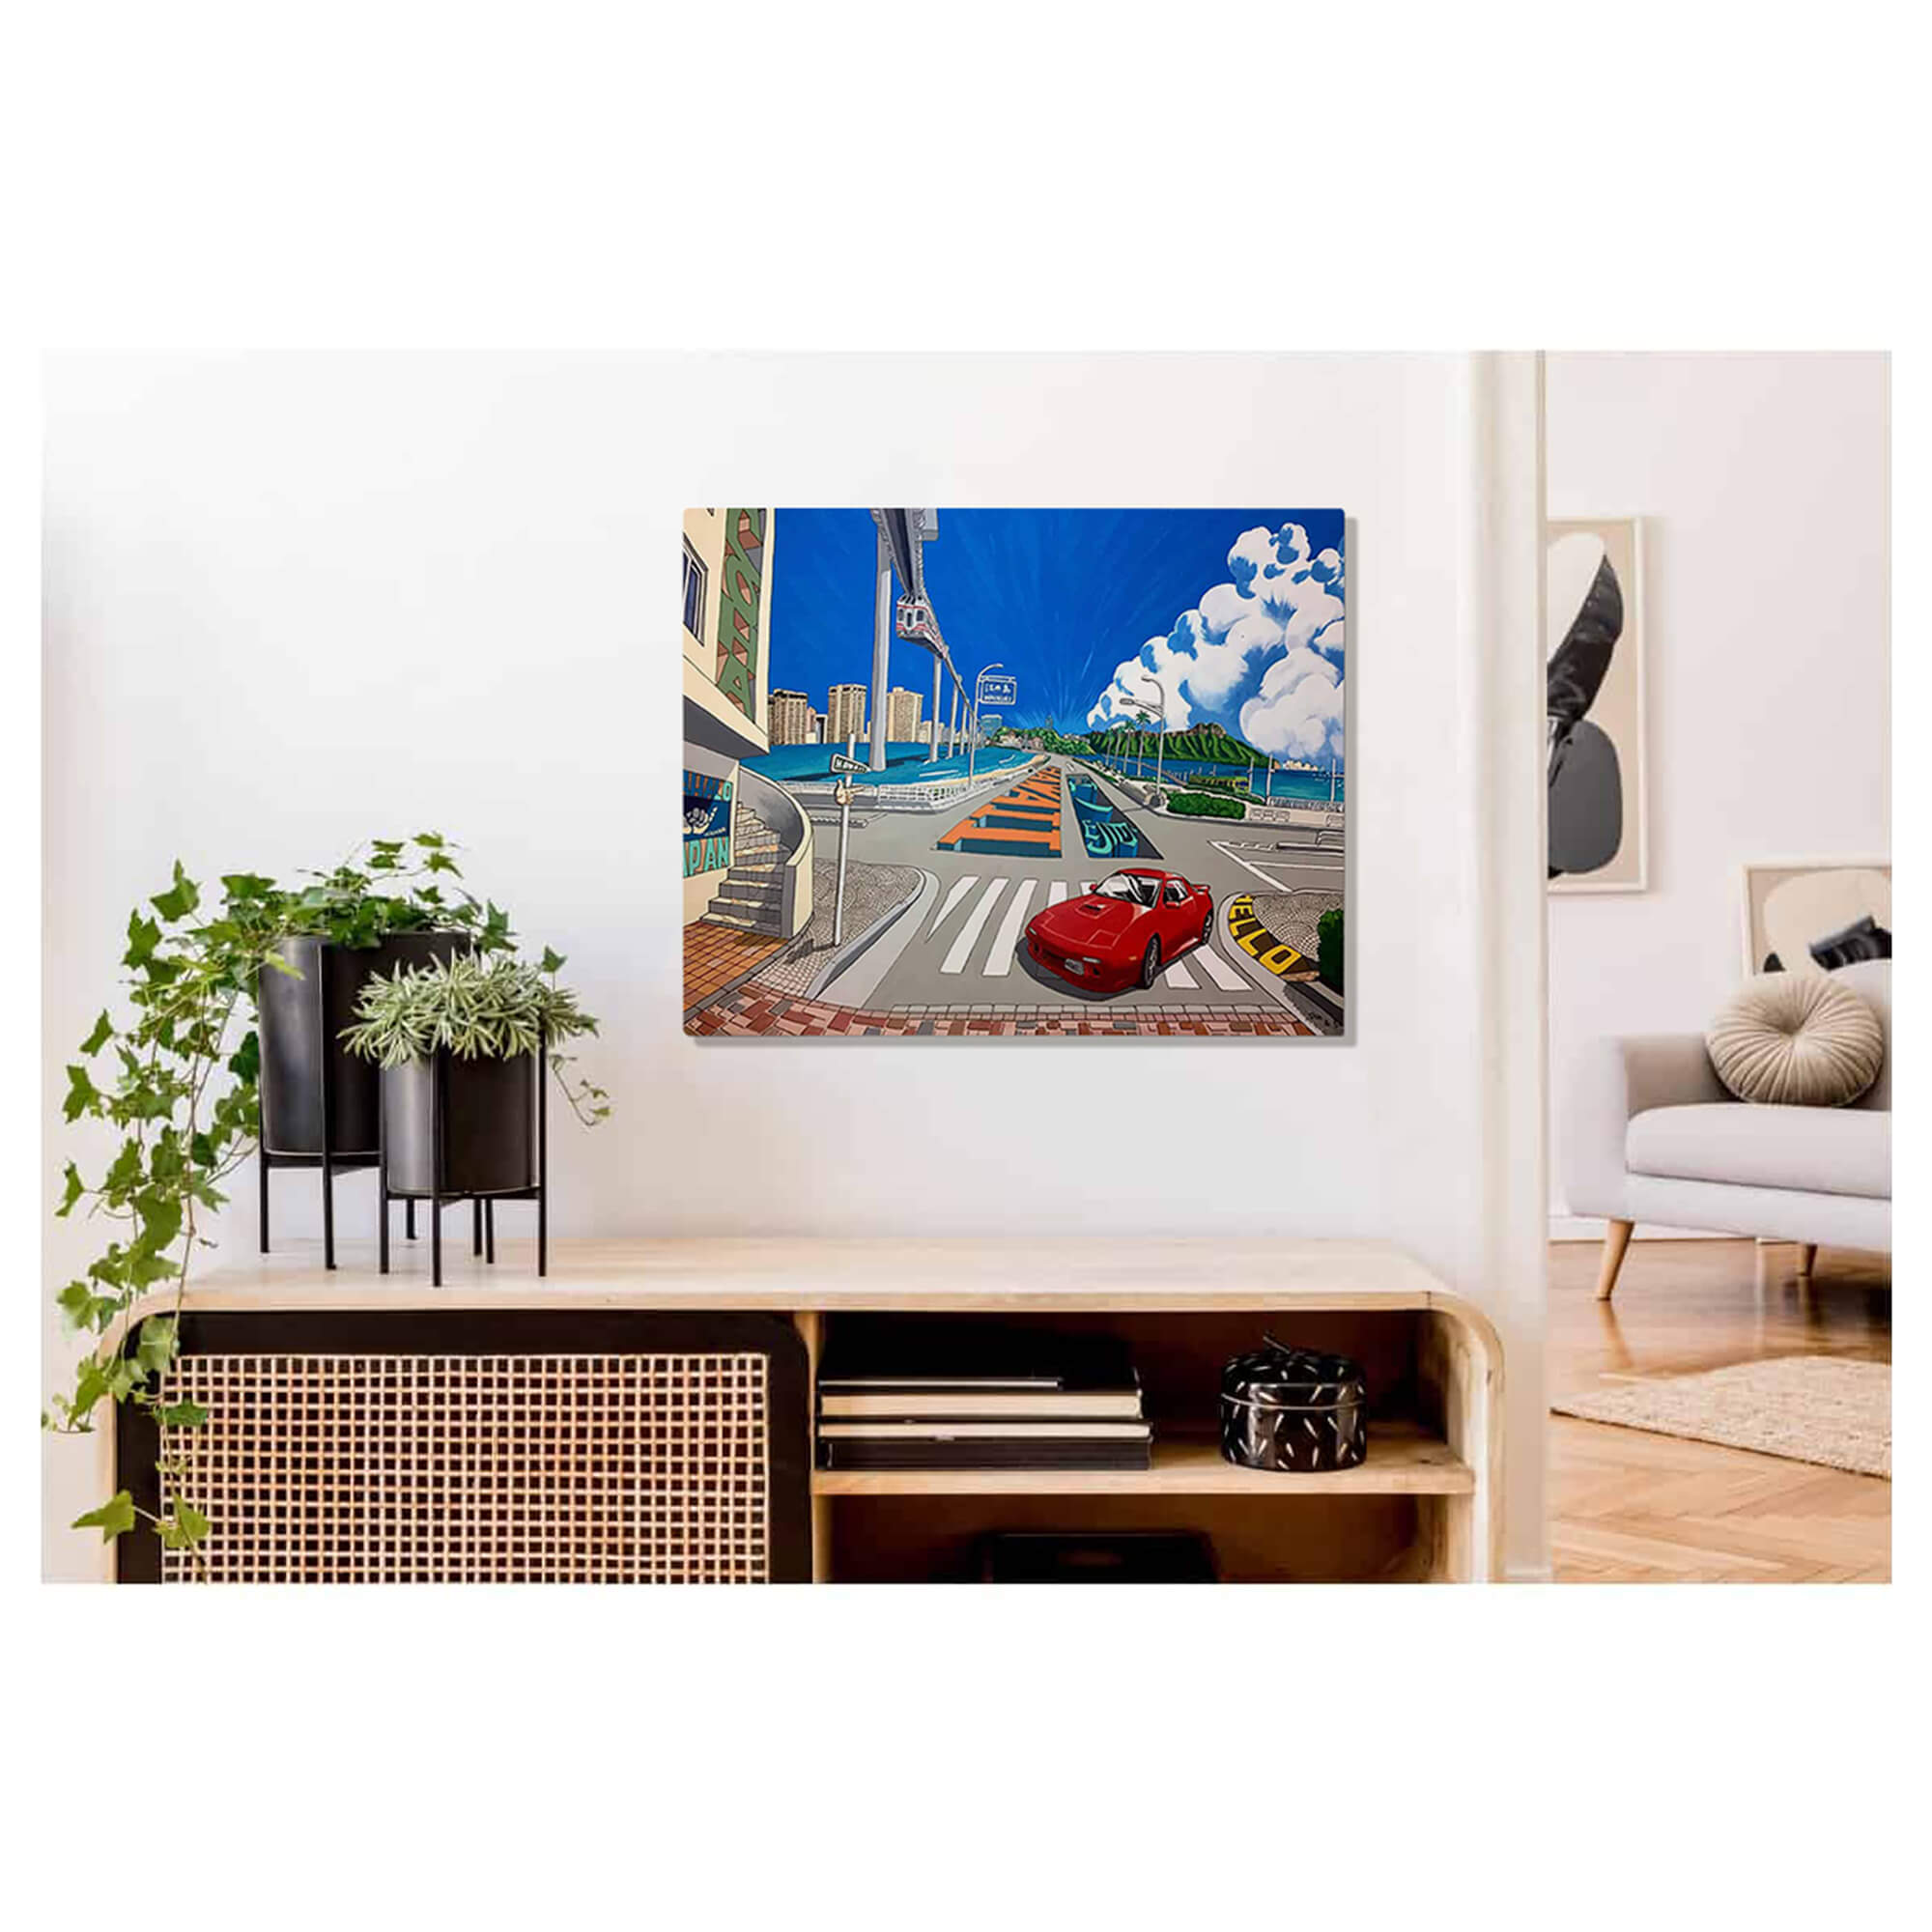 A metal art print of Hawaii close to Japan that you can see the street in front of you connecting Waikiki to Enjoshima by Hawaii artist Shin Kato